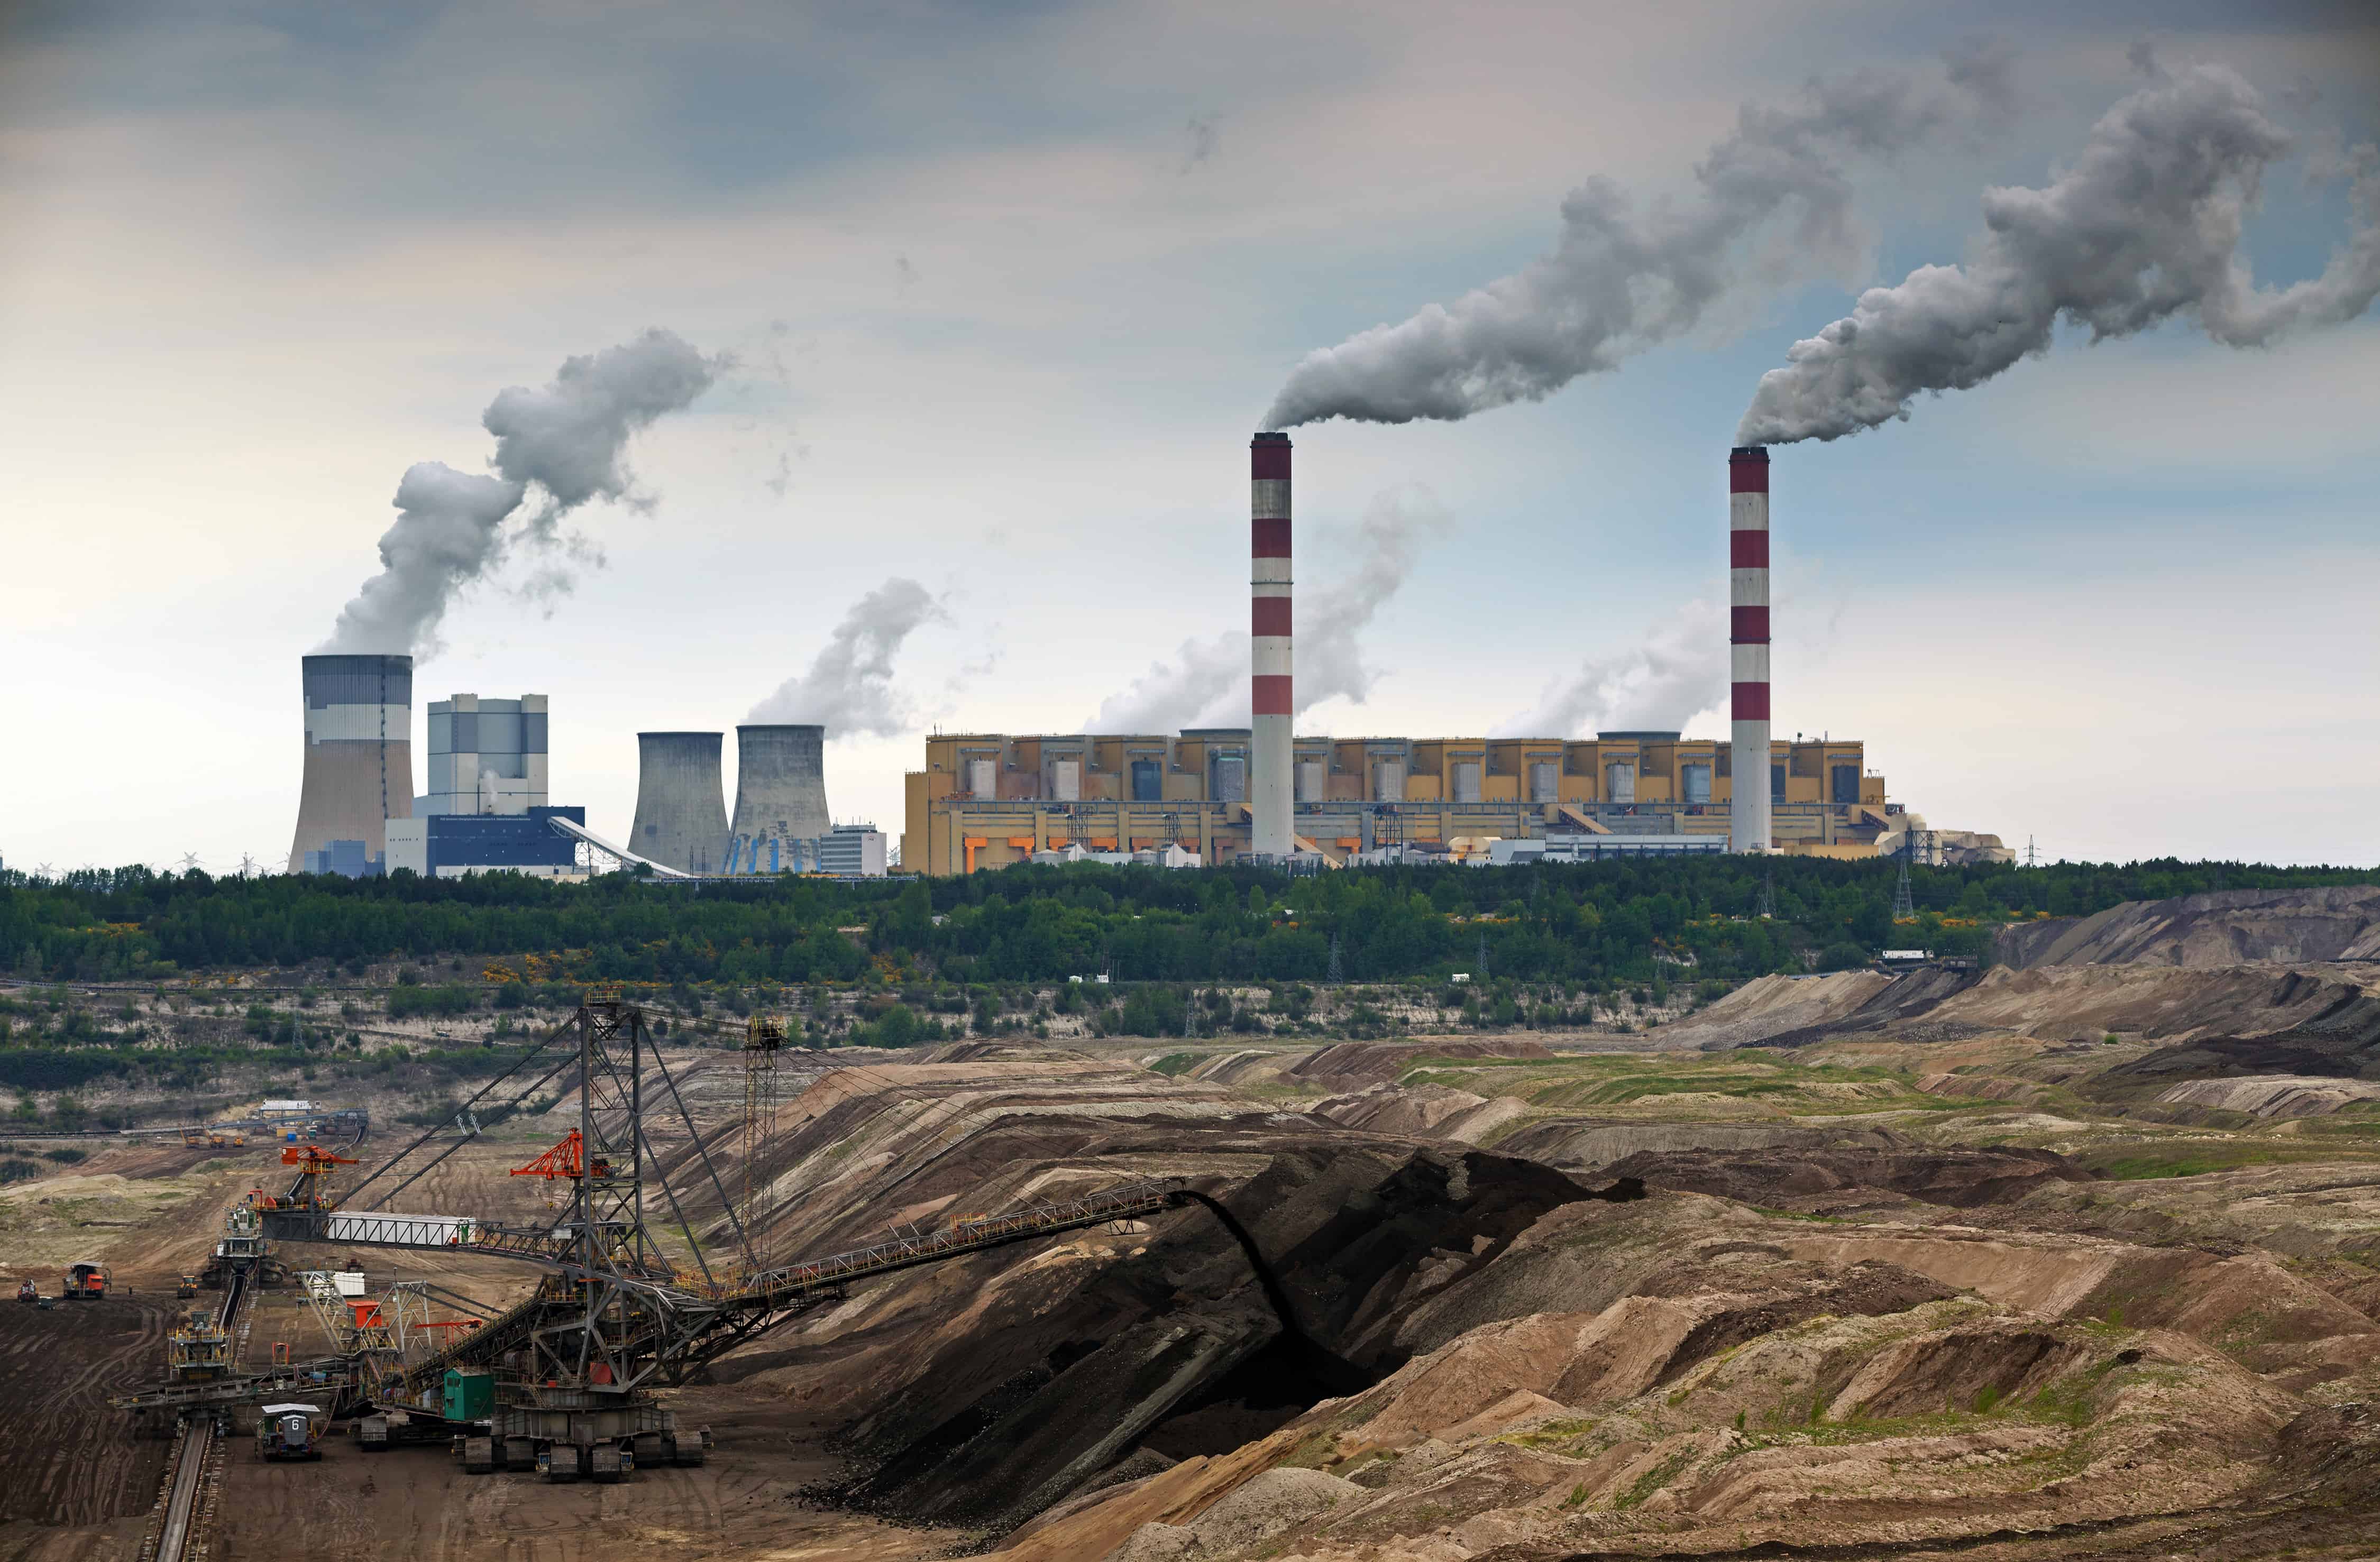 Global initiatives take aim at ending the use of coal, financing to be trimmed by 99 percent